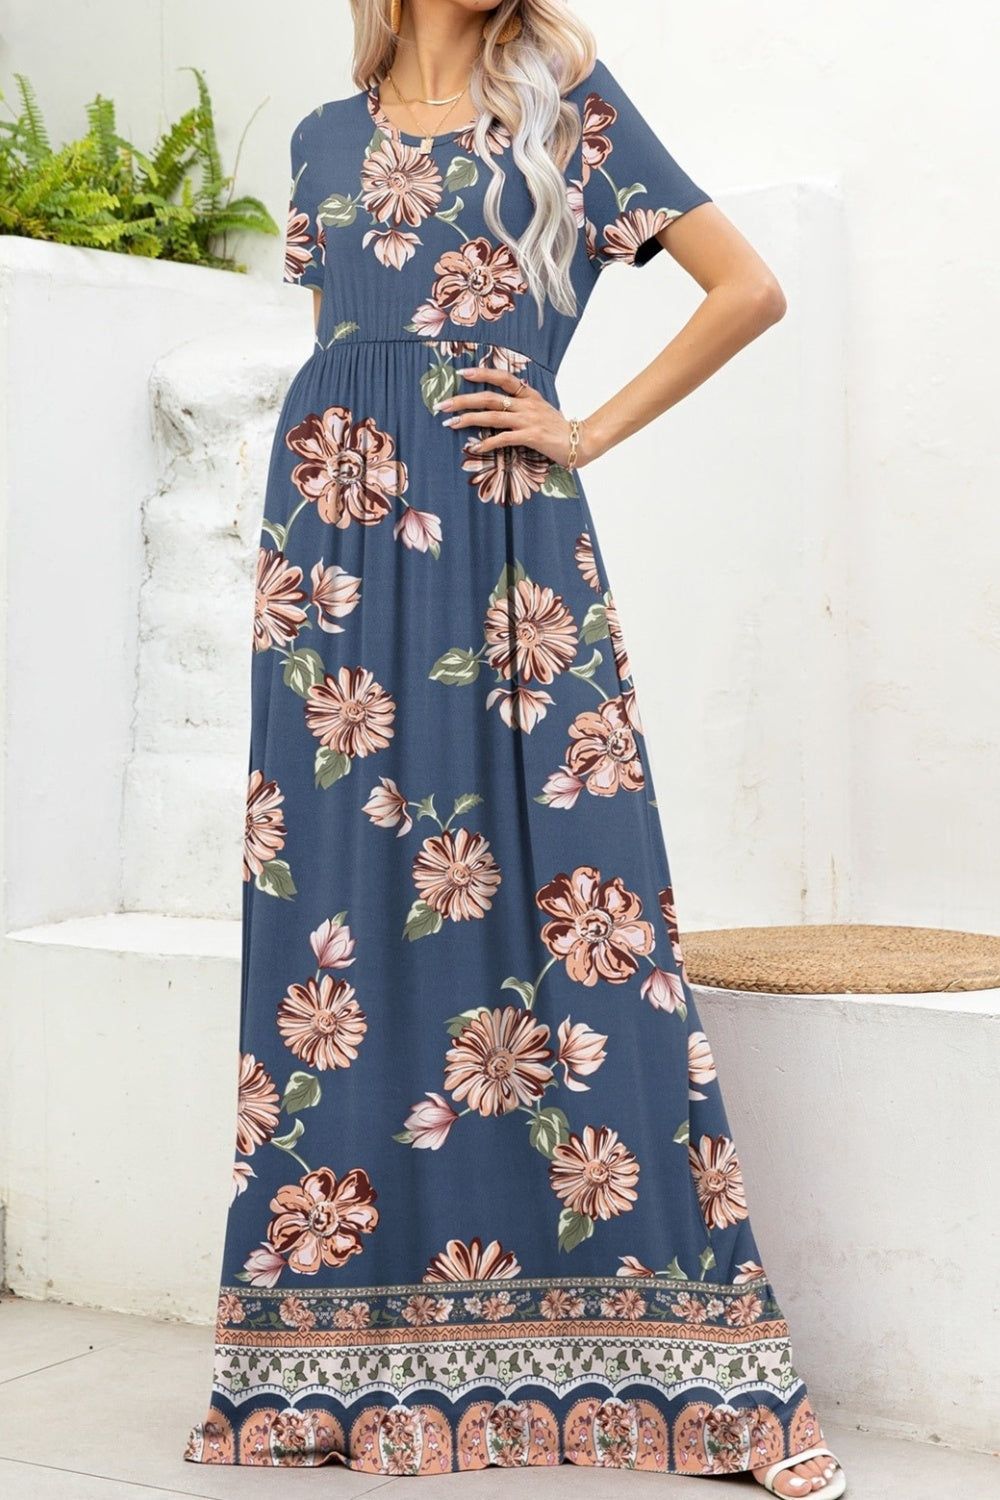 Elegant blue maxi dress with intricate floral and geometric designs